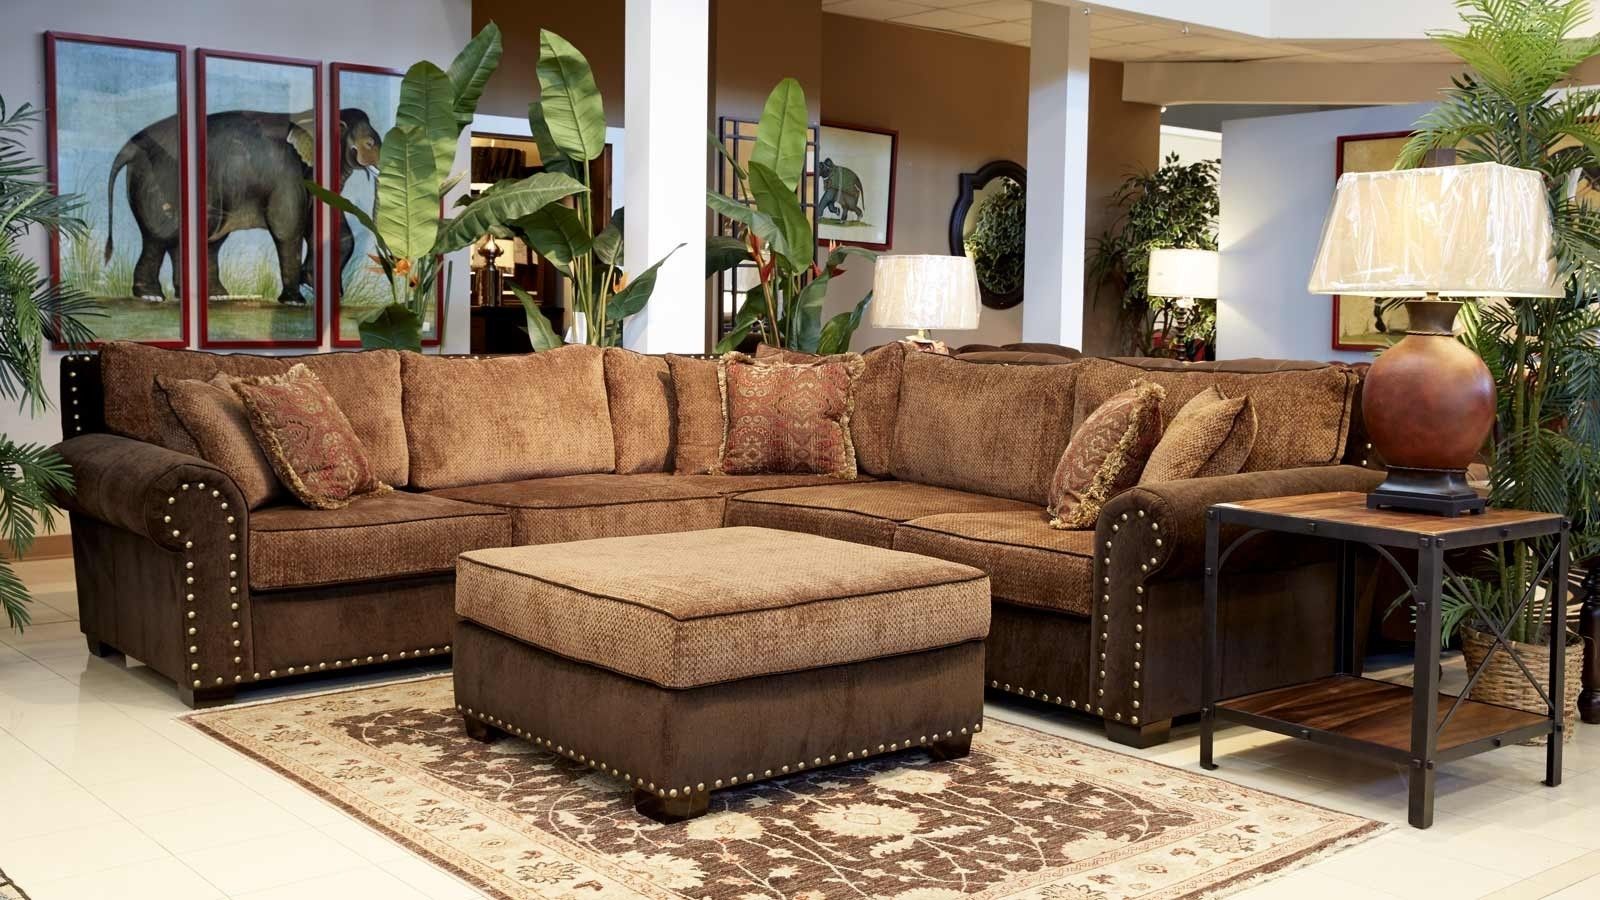 Barcelona Living Room Collection | Gallery Furniture With Gallery Furniture Sectional Sofas (View 5 of 10)